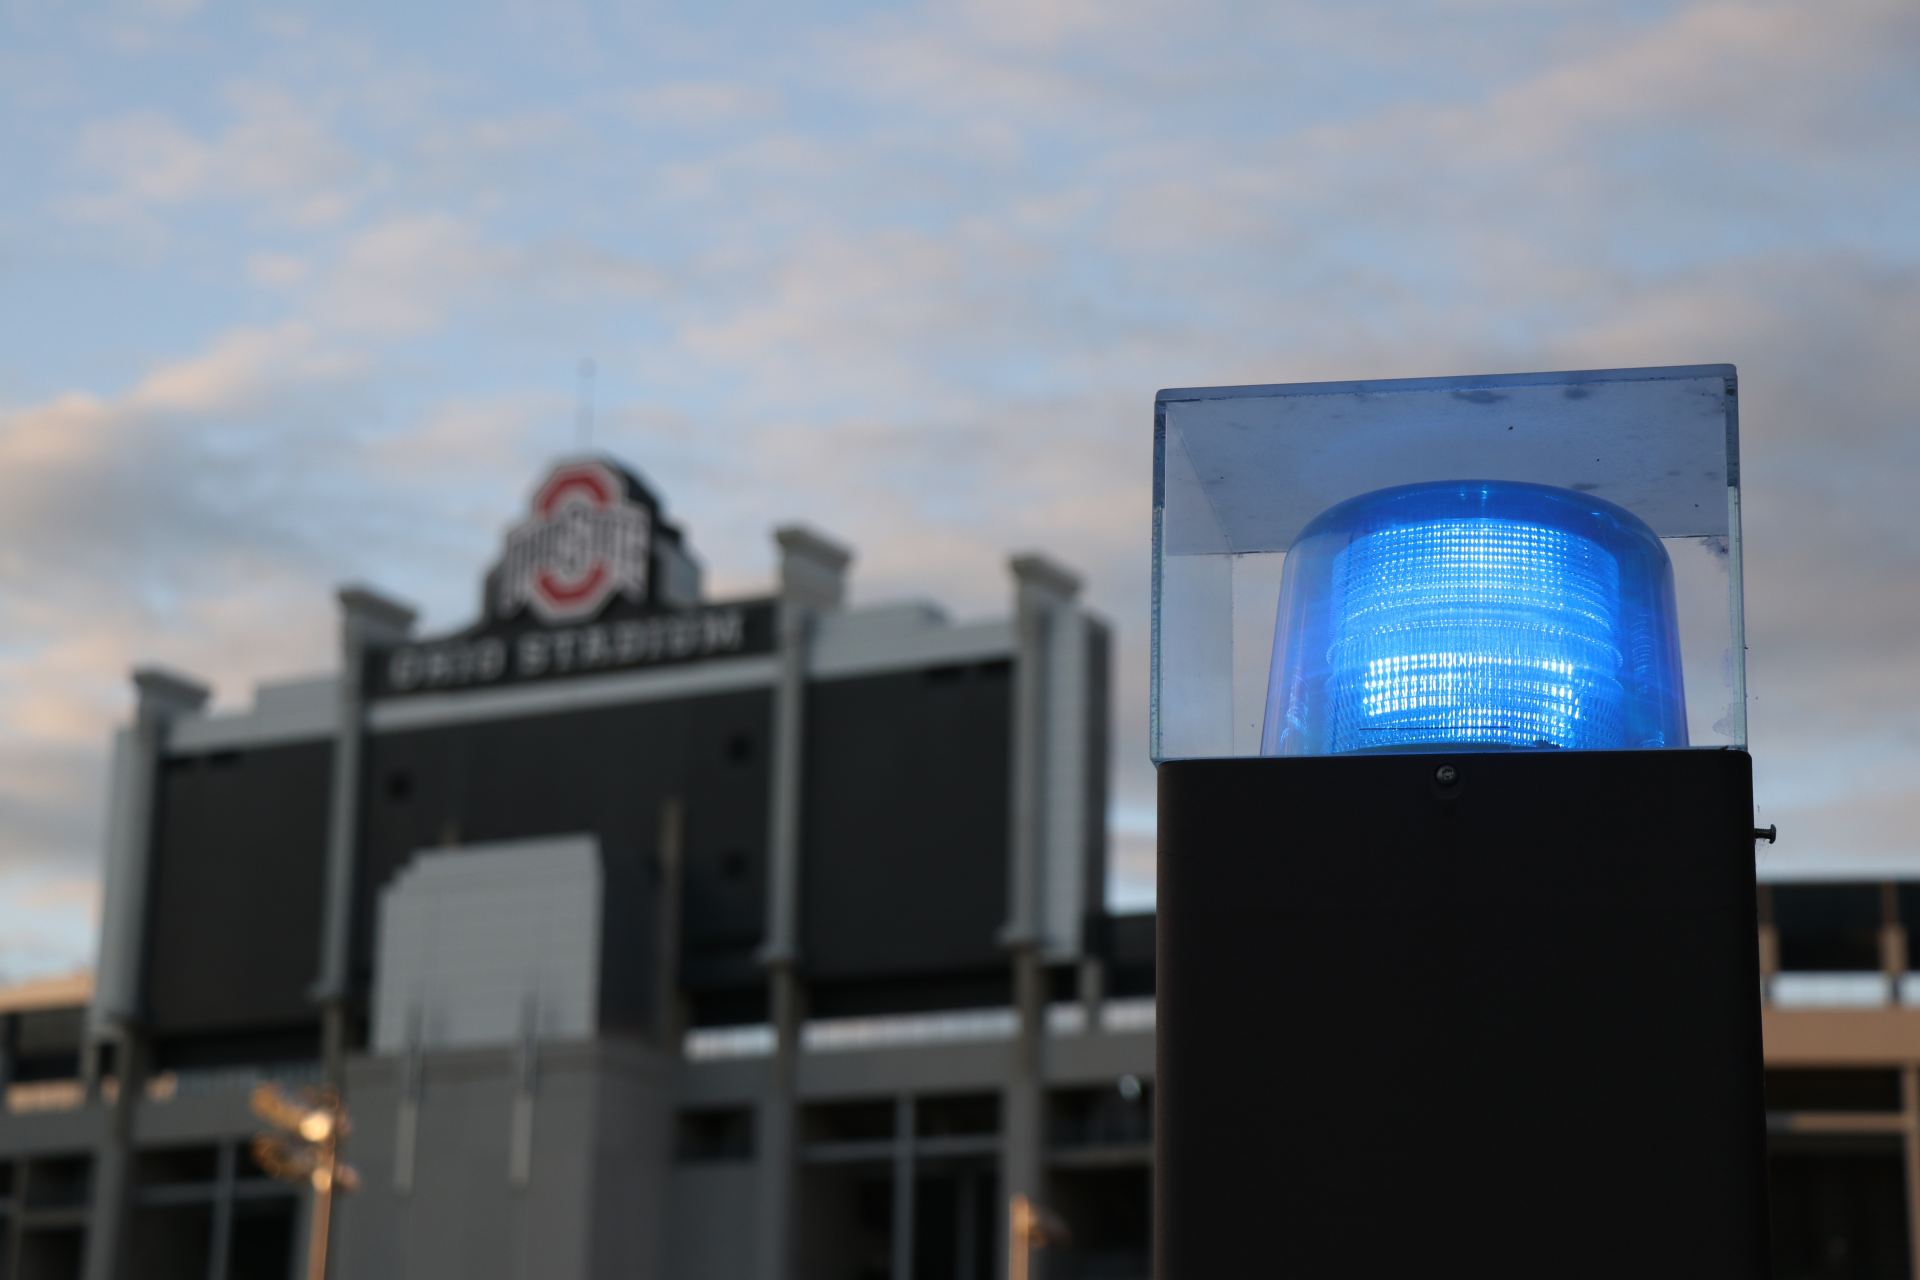 Ohio State offers self-defense videos, expands Lyft Ride Smart operation hours